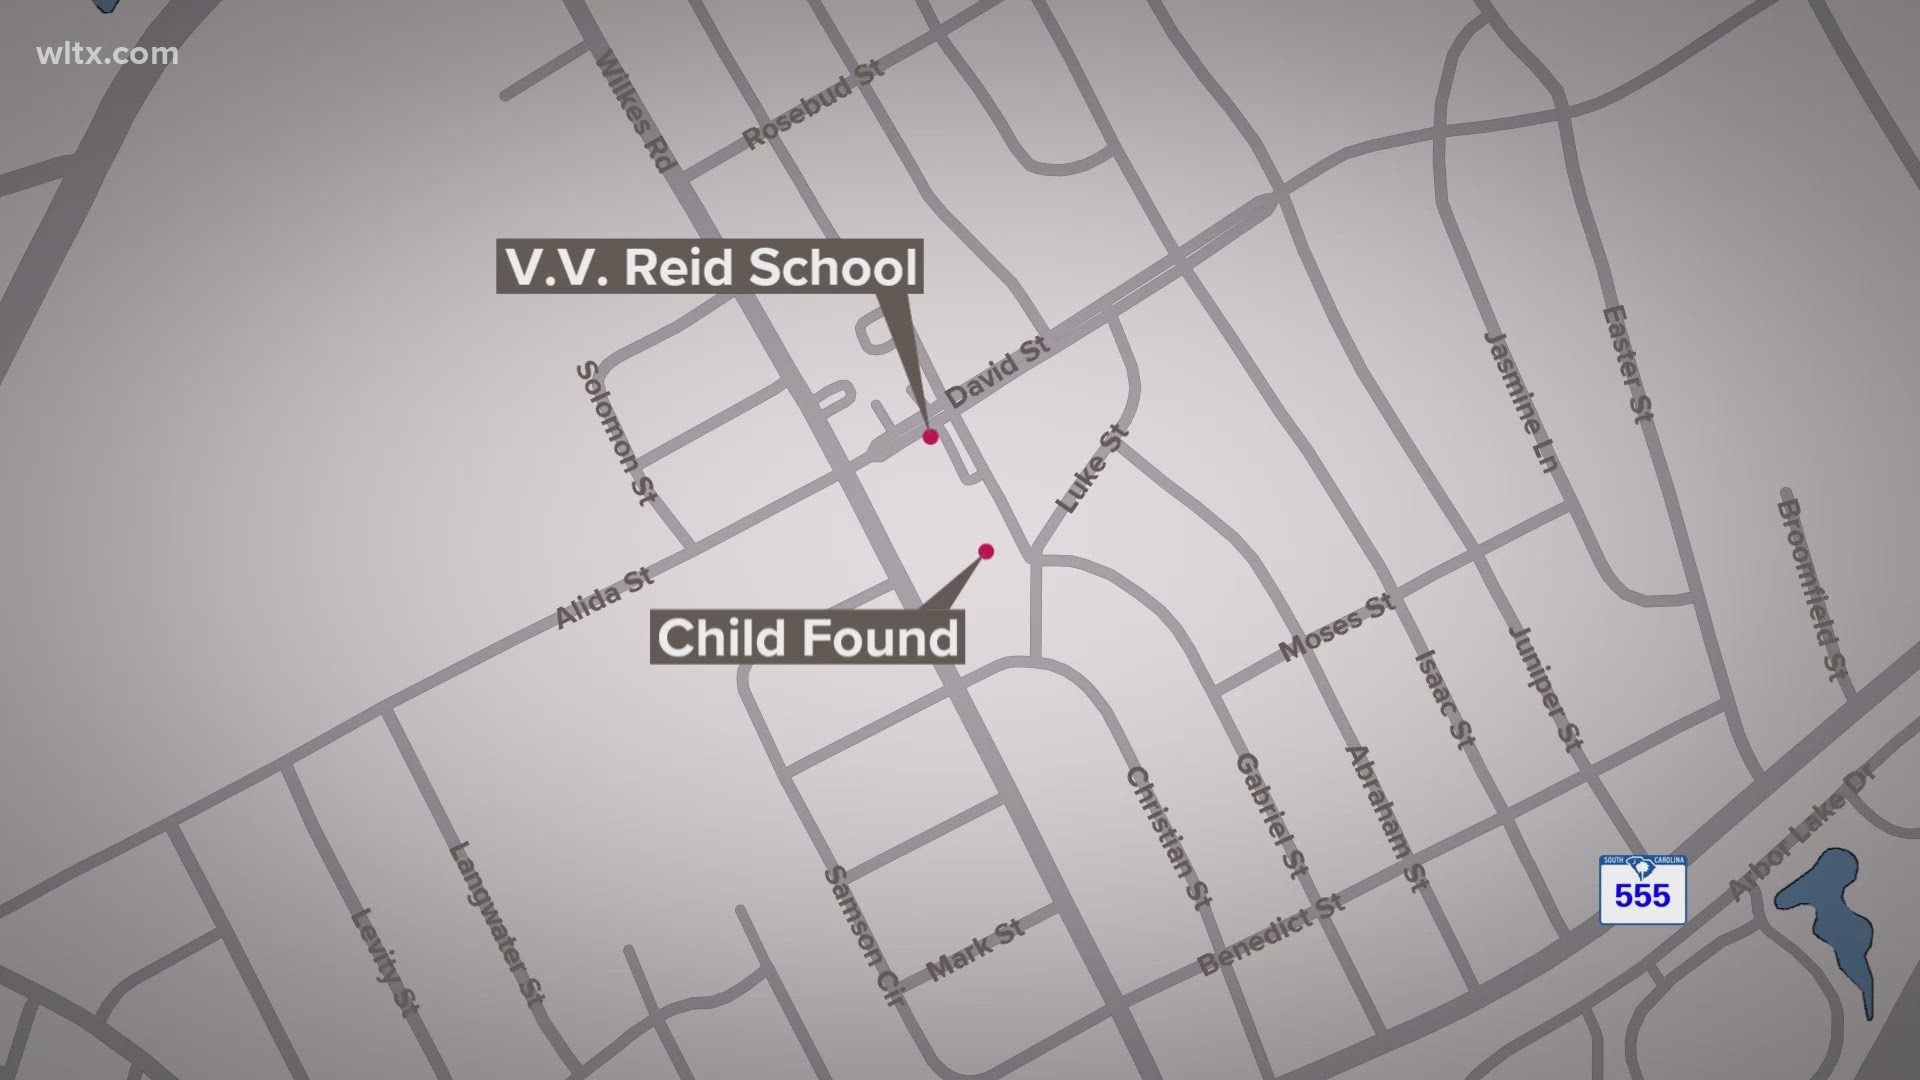 It happened at V.V. Reid child care.  The little girl was found in the 600 block of Gabriel street.